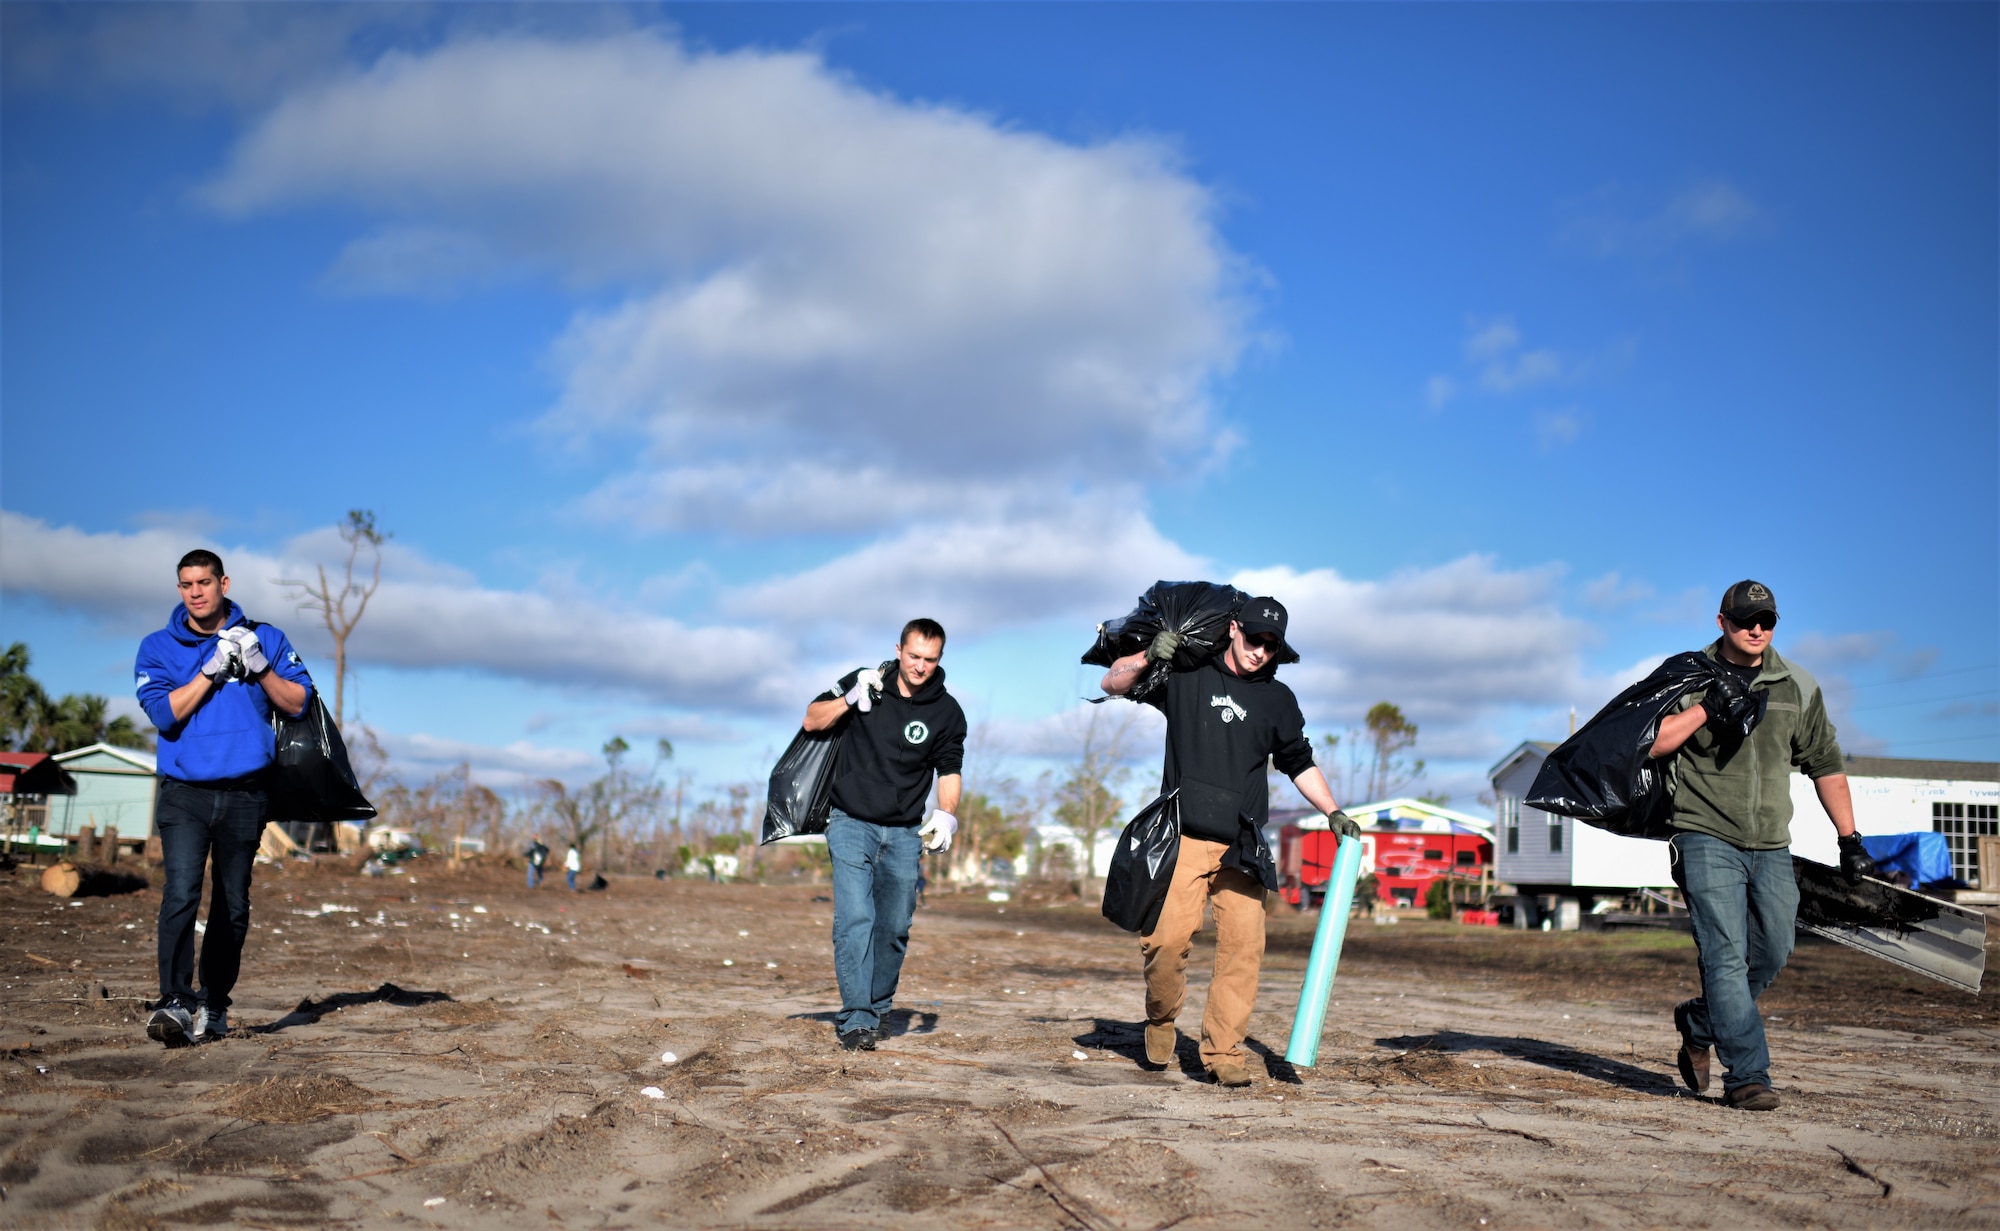 Airman from Tyndall Air Force Base carry bags of debris while carrying bags of trash while cleaning debris from Under the Palms Park in Mexico Beach, Fla., Dec. 16, 2018. Thirty nine volunteers from Tyndall and Eglin Air Force Bases came together to help clean Mexico Beach, one of the communities hit the hardest by Hurricane Michael.  The volunteers were able to clean up more than 40 cubic yards of debris within four hours. (U.S. Air Force photo by Tech. Sgt. Sara Keller)